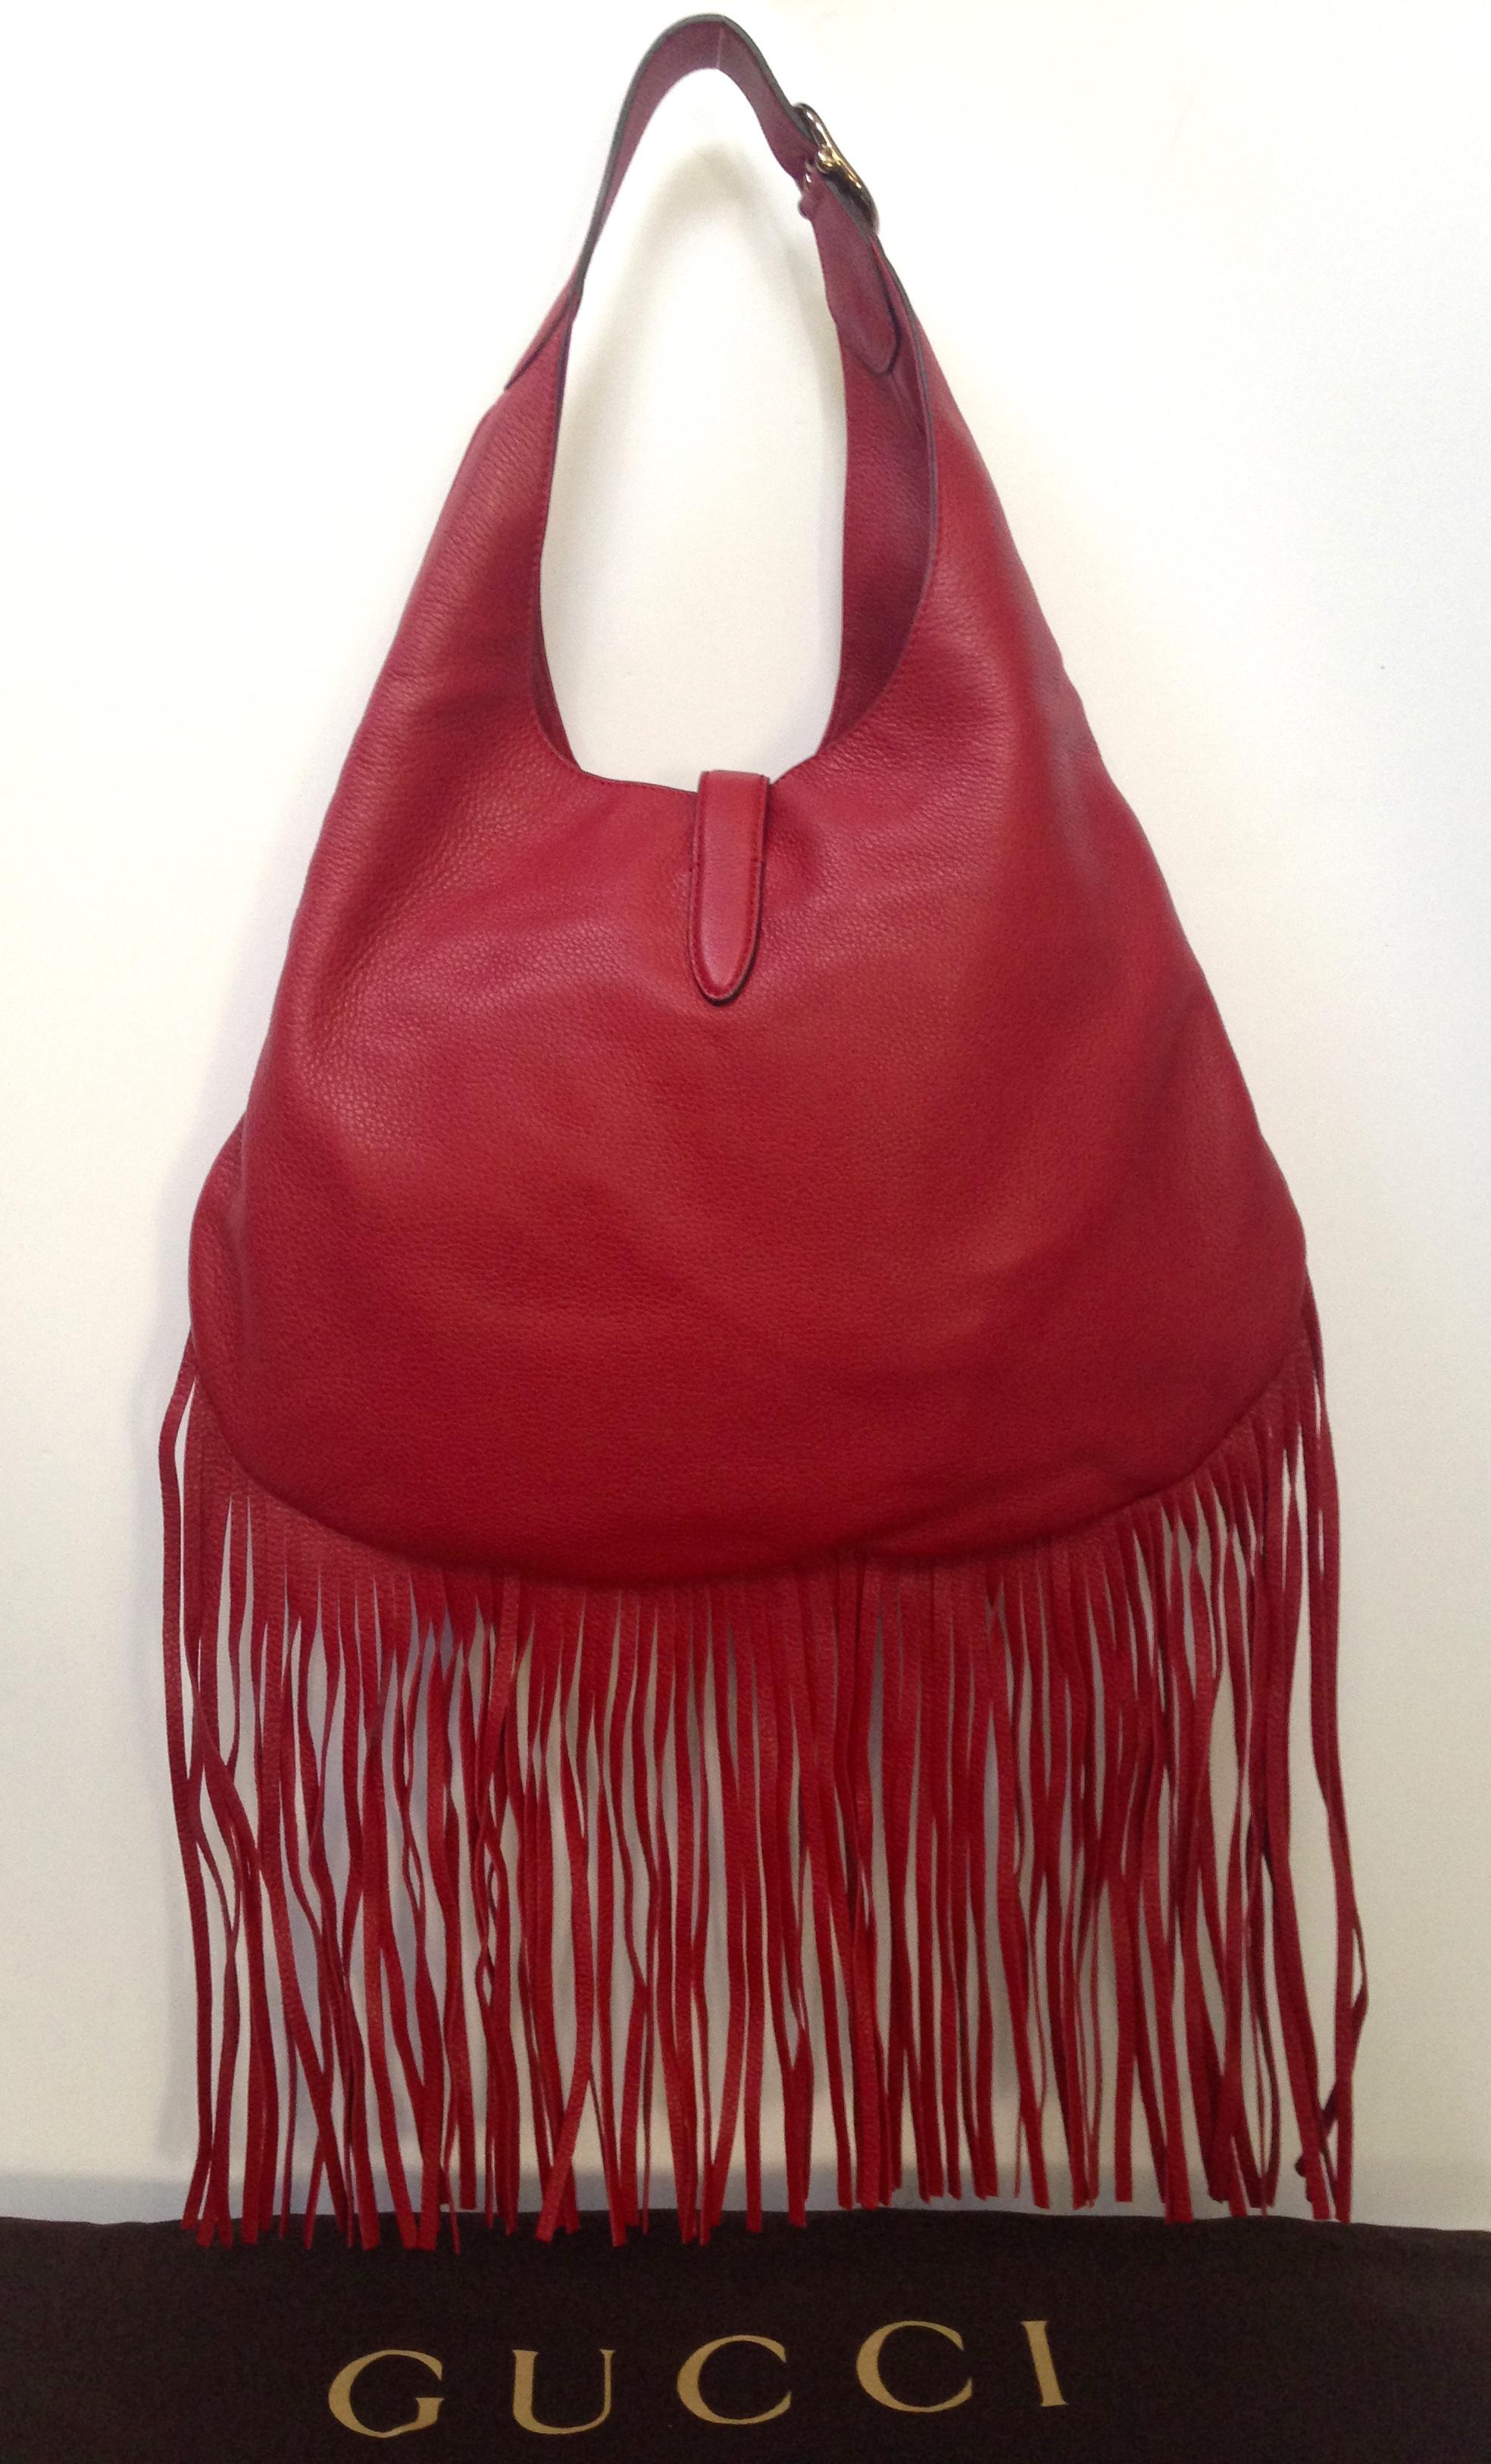 Gucci Nouveau fringe leather hobo handbag.  Red leather with silver piston closure and adjustable buckled shoulder strap with 9